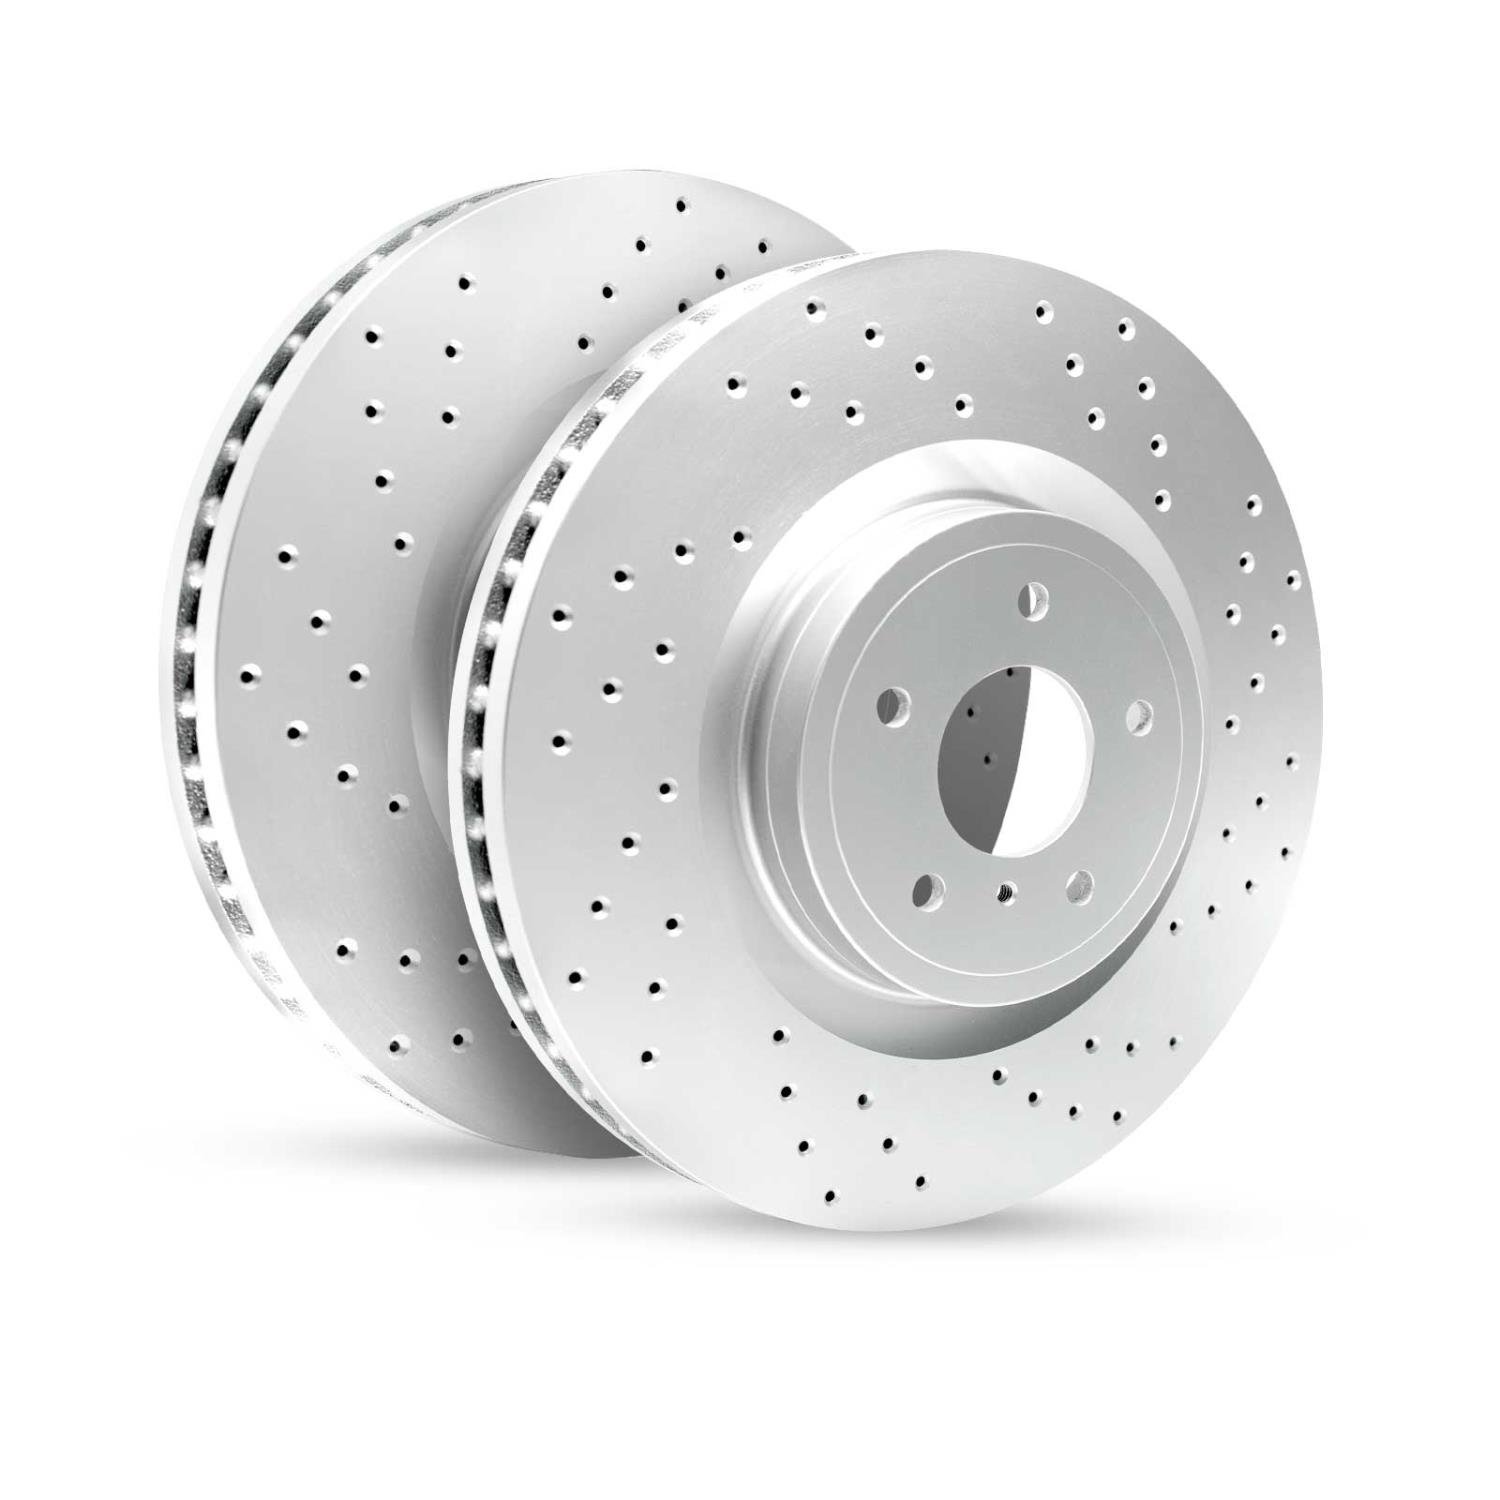 GEO-Carbon Drilled/Slotted Rotors, 2006-2015 BMW, Position: Rear